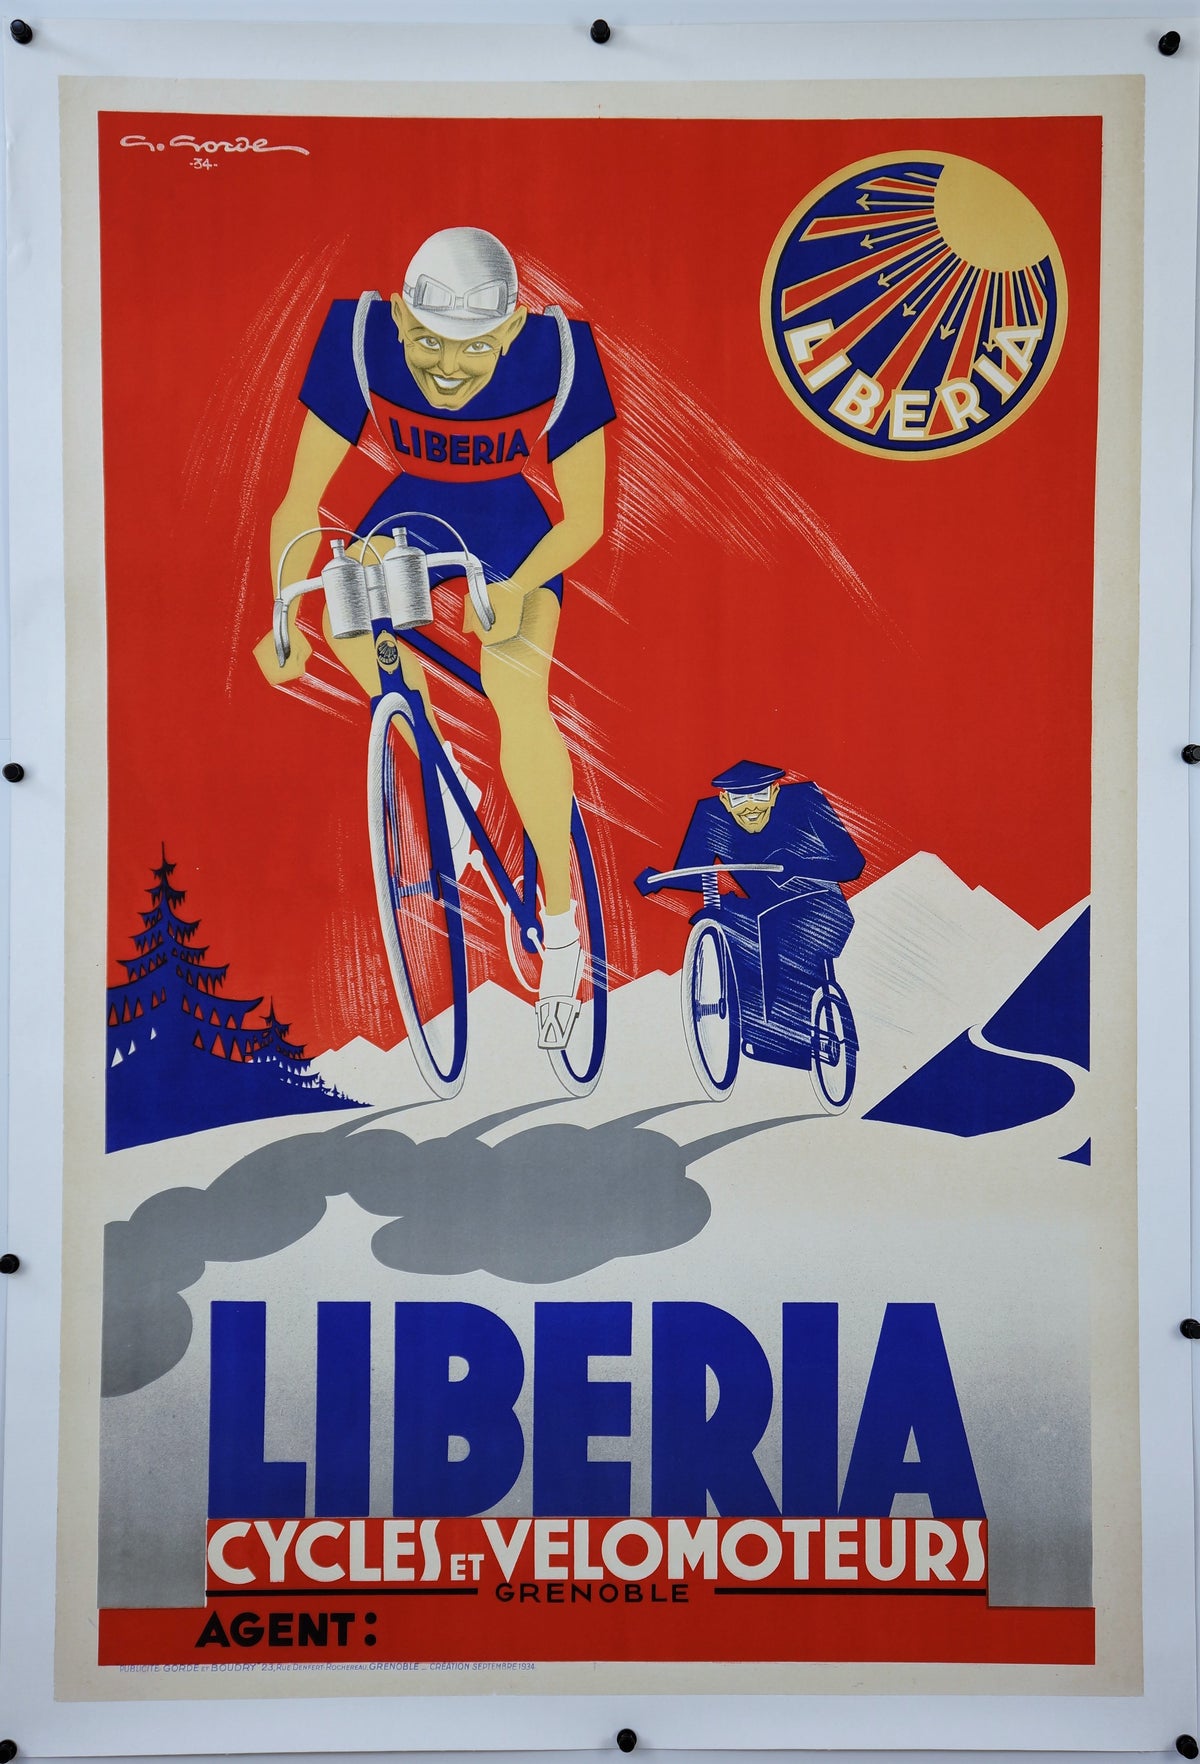 Liberia Cycles - Authentic Vintage Poster